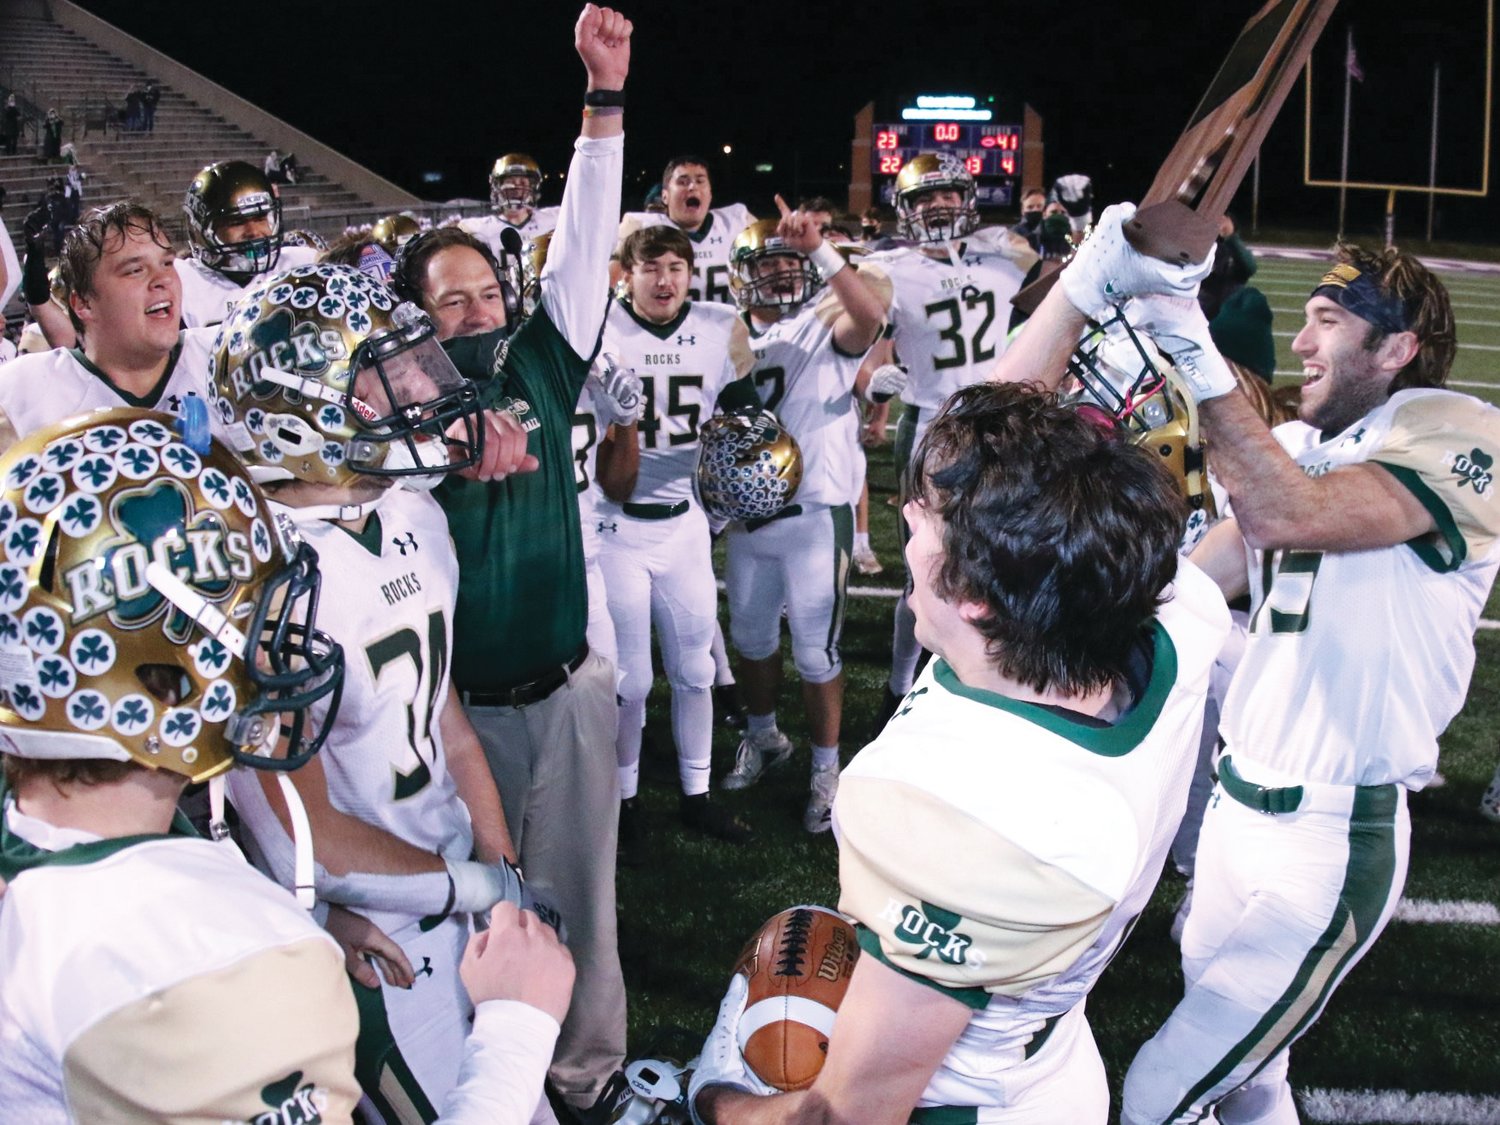 Westfield coach Jake Gilbert celebrates with his team after the Shamrocks clinched their third semi-state title in eight years last fall with a 41-23 win at Merrillville.  Gilbert started his coaching career at North Montgomery and spent time at Wabash College as an assistant coach.